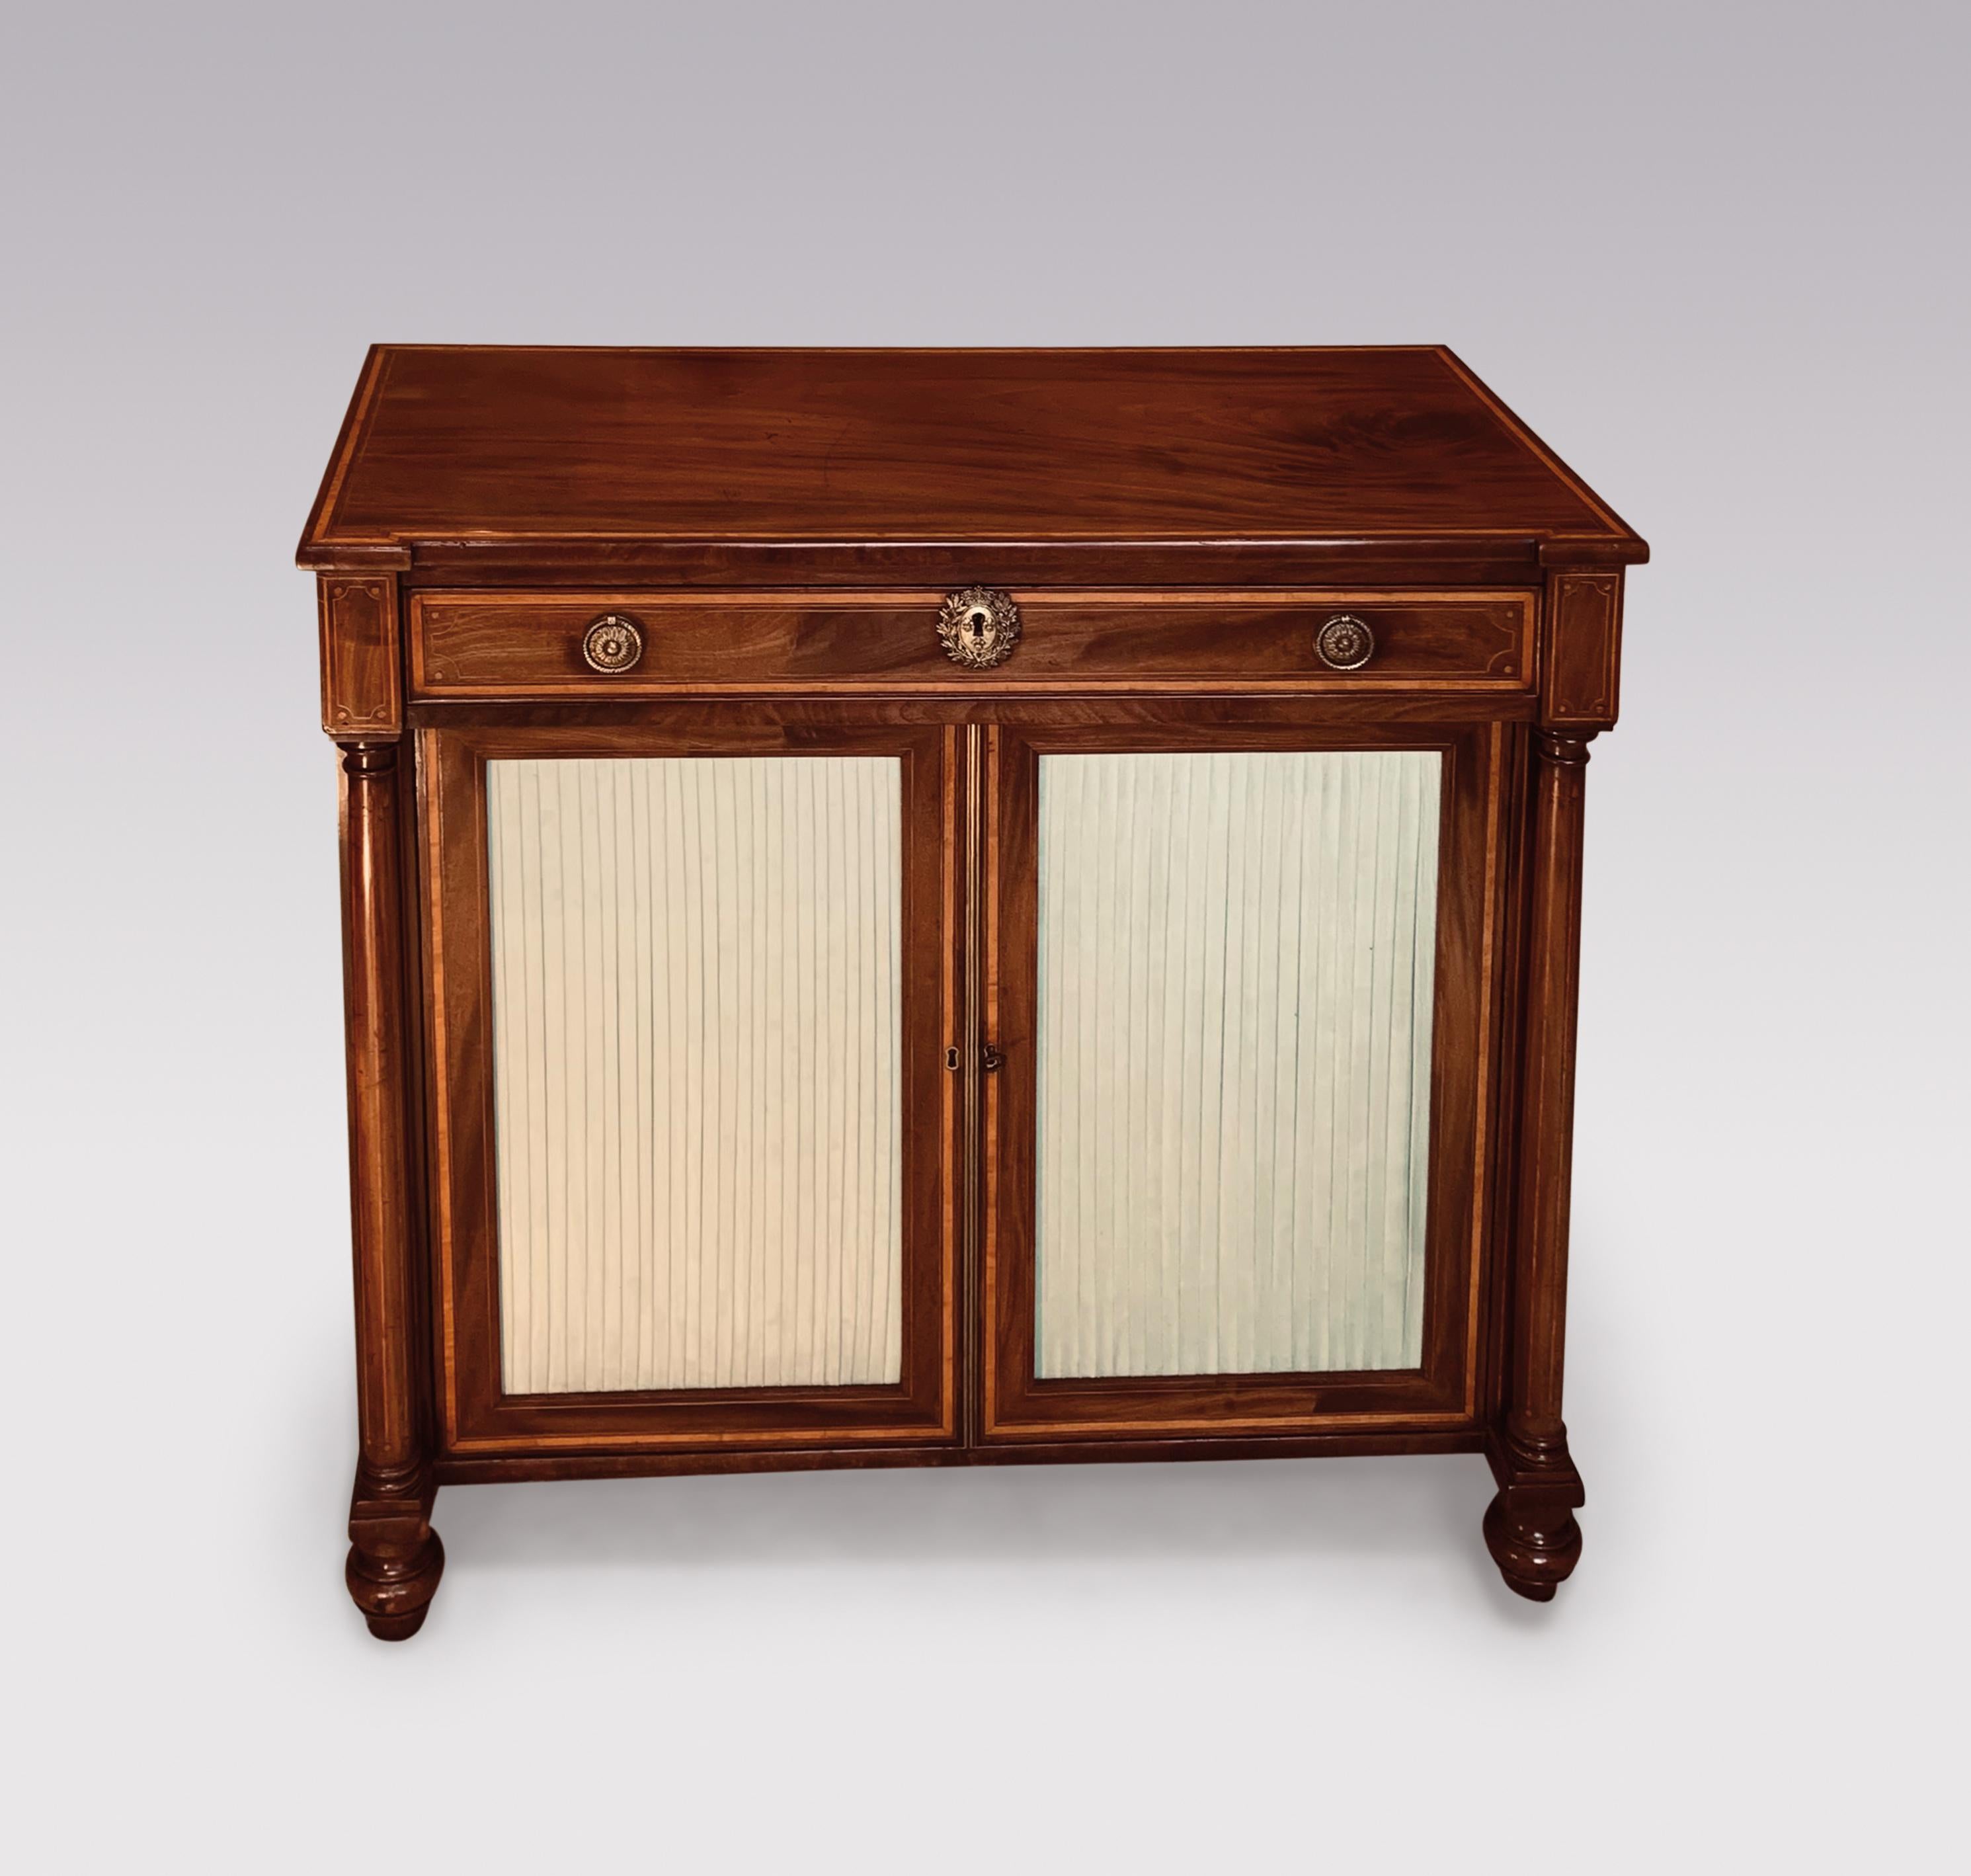 An early 19th Century Regency period figured mahogany two door cabinet, satinwood banded throughout having fieze drawer above pleated panelled doors flanked by satinwood line inlaid columns, supported on short turned legs.